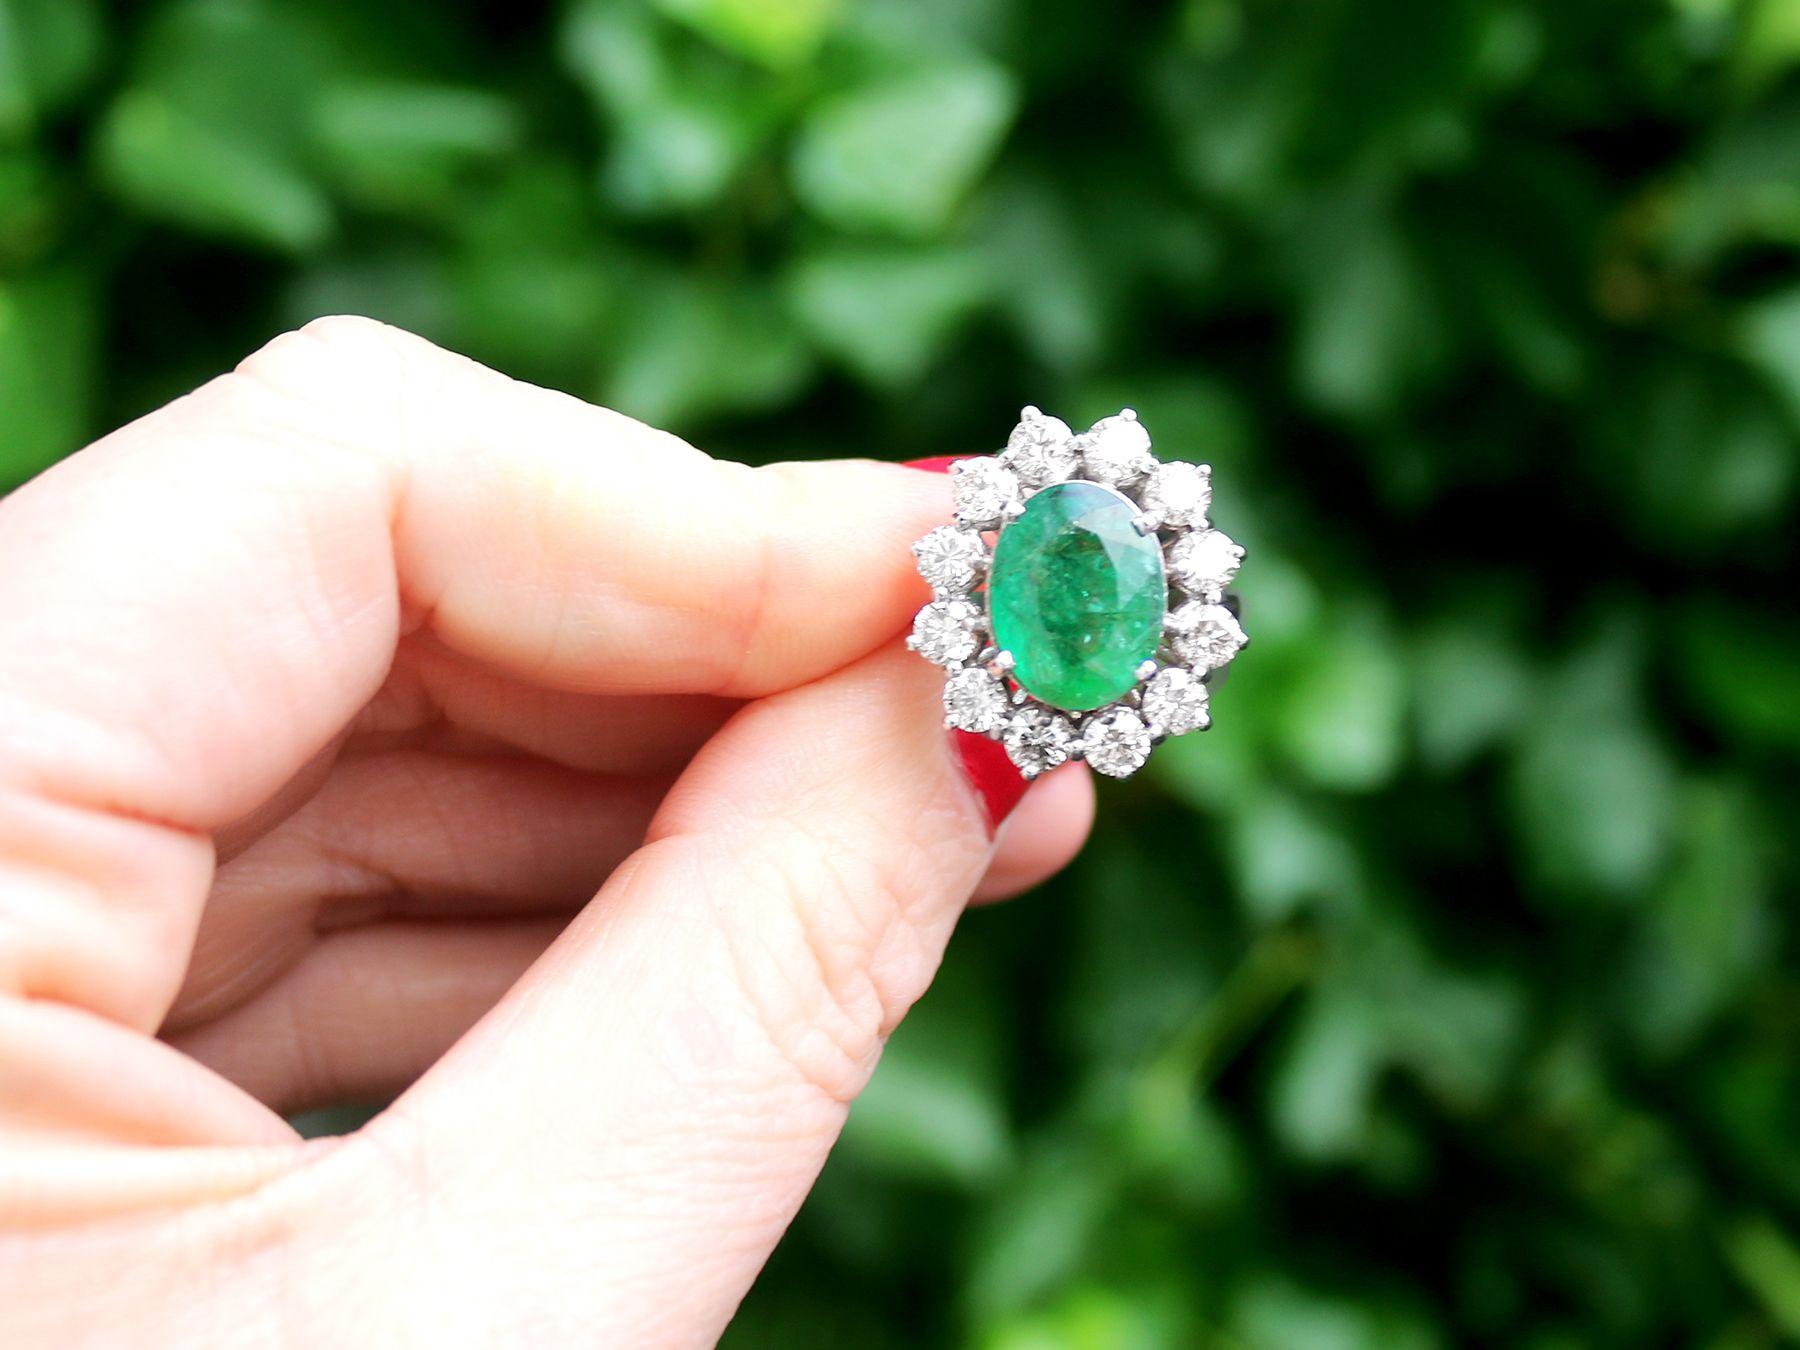 A stunning, fine and impressive vintage 4.82 carat natural emerald and 3.12 carat diamond, 18 karat white gold cluster ring; an addition to our vintage jewelry and estate jewelry collections

This impressive vintage emerald dress ring has been